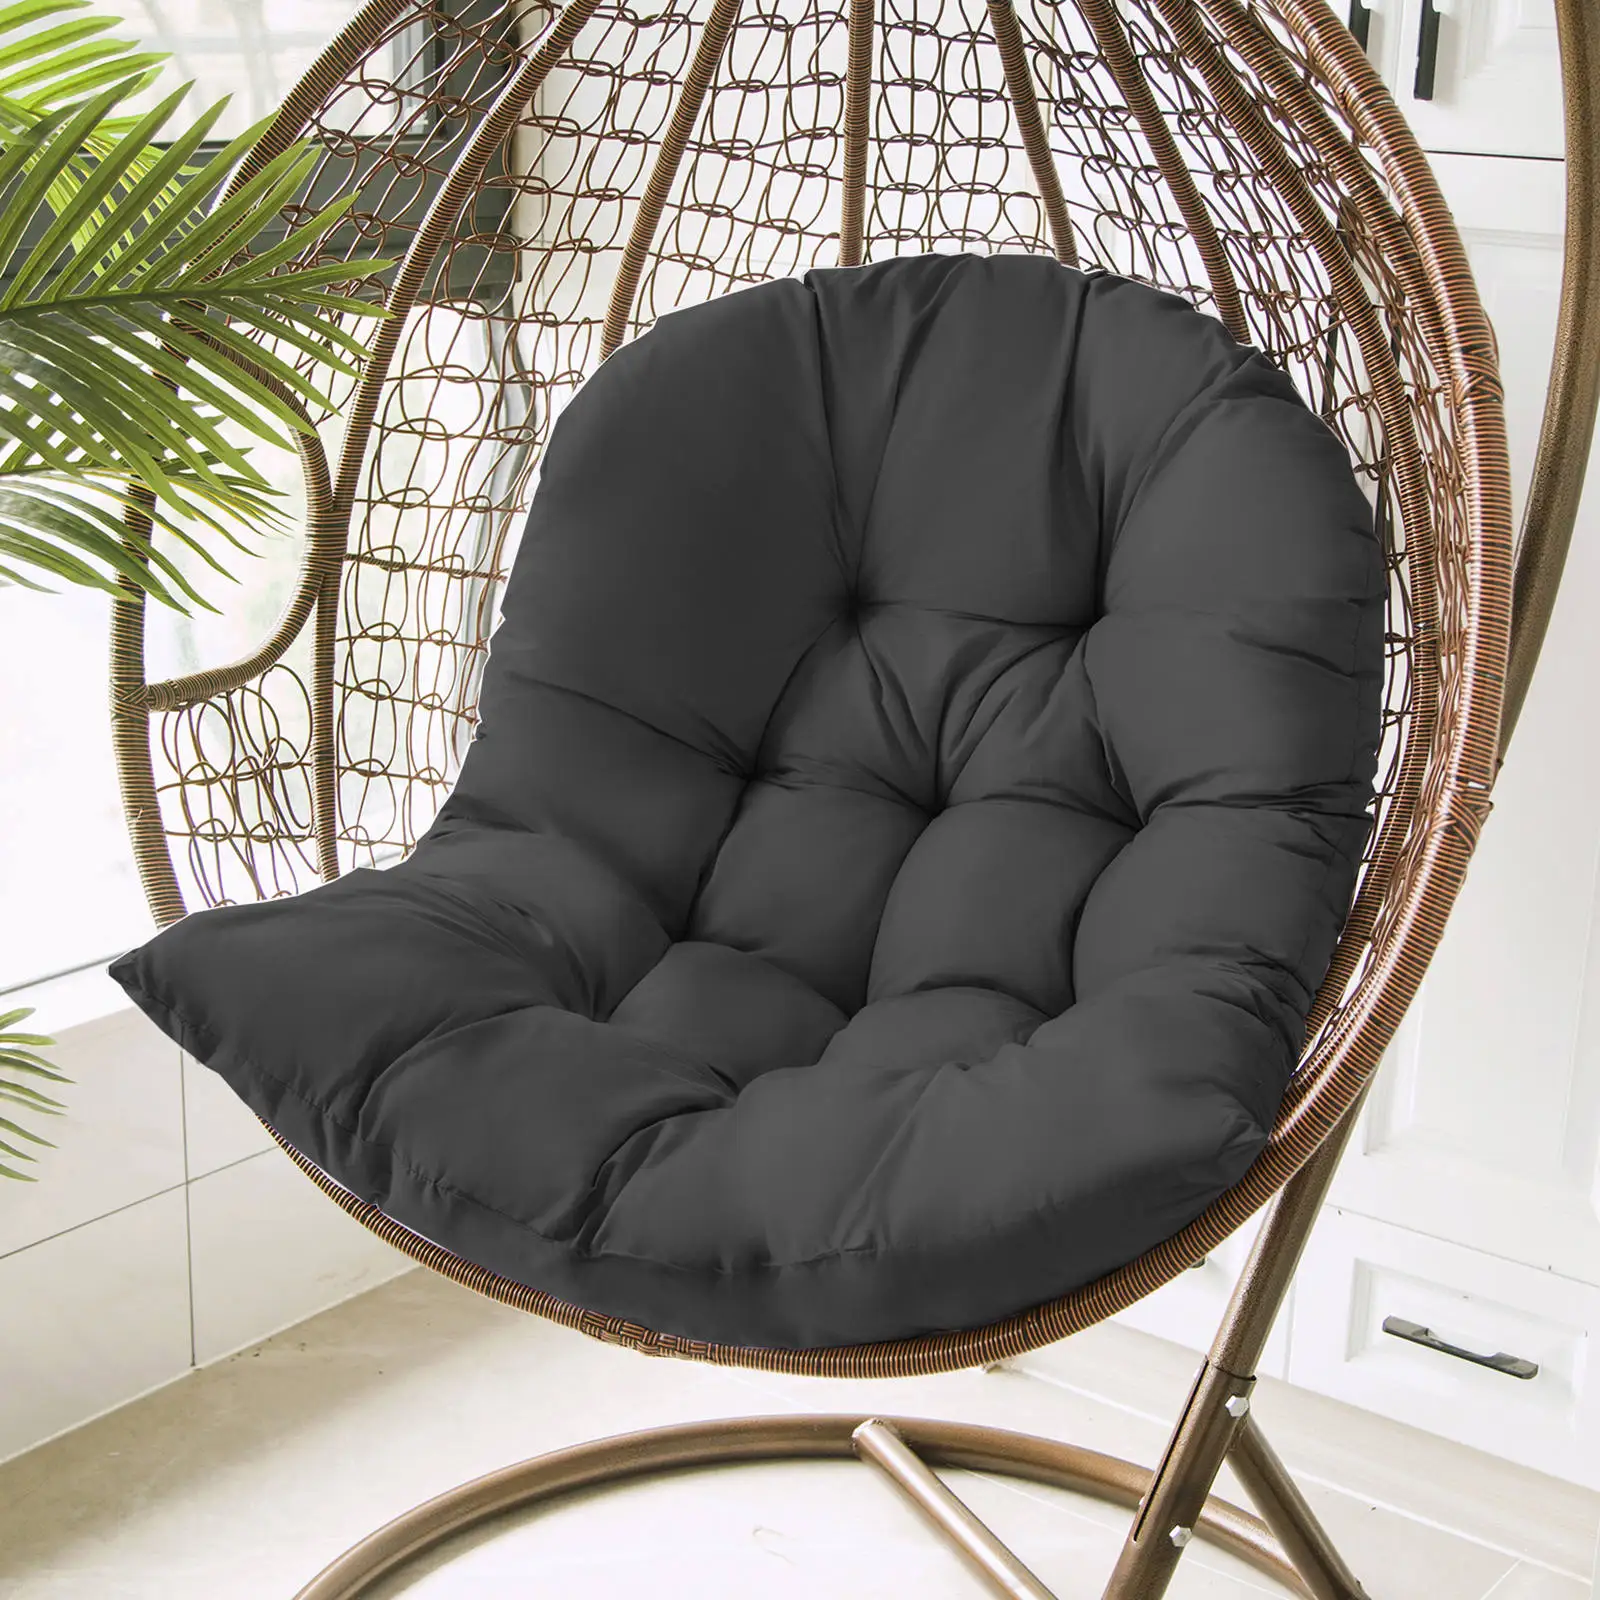 Swing Basket Cushion Thickened Breathable Hanging Egg Hammock Rocking Chair Seat Pads for Home Patio Garden Living Rooms.